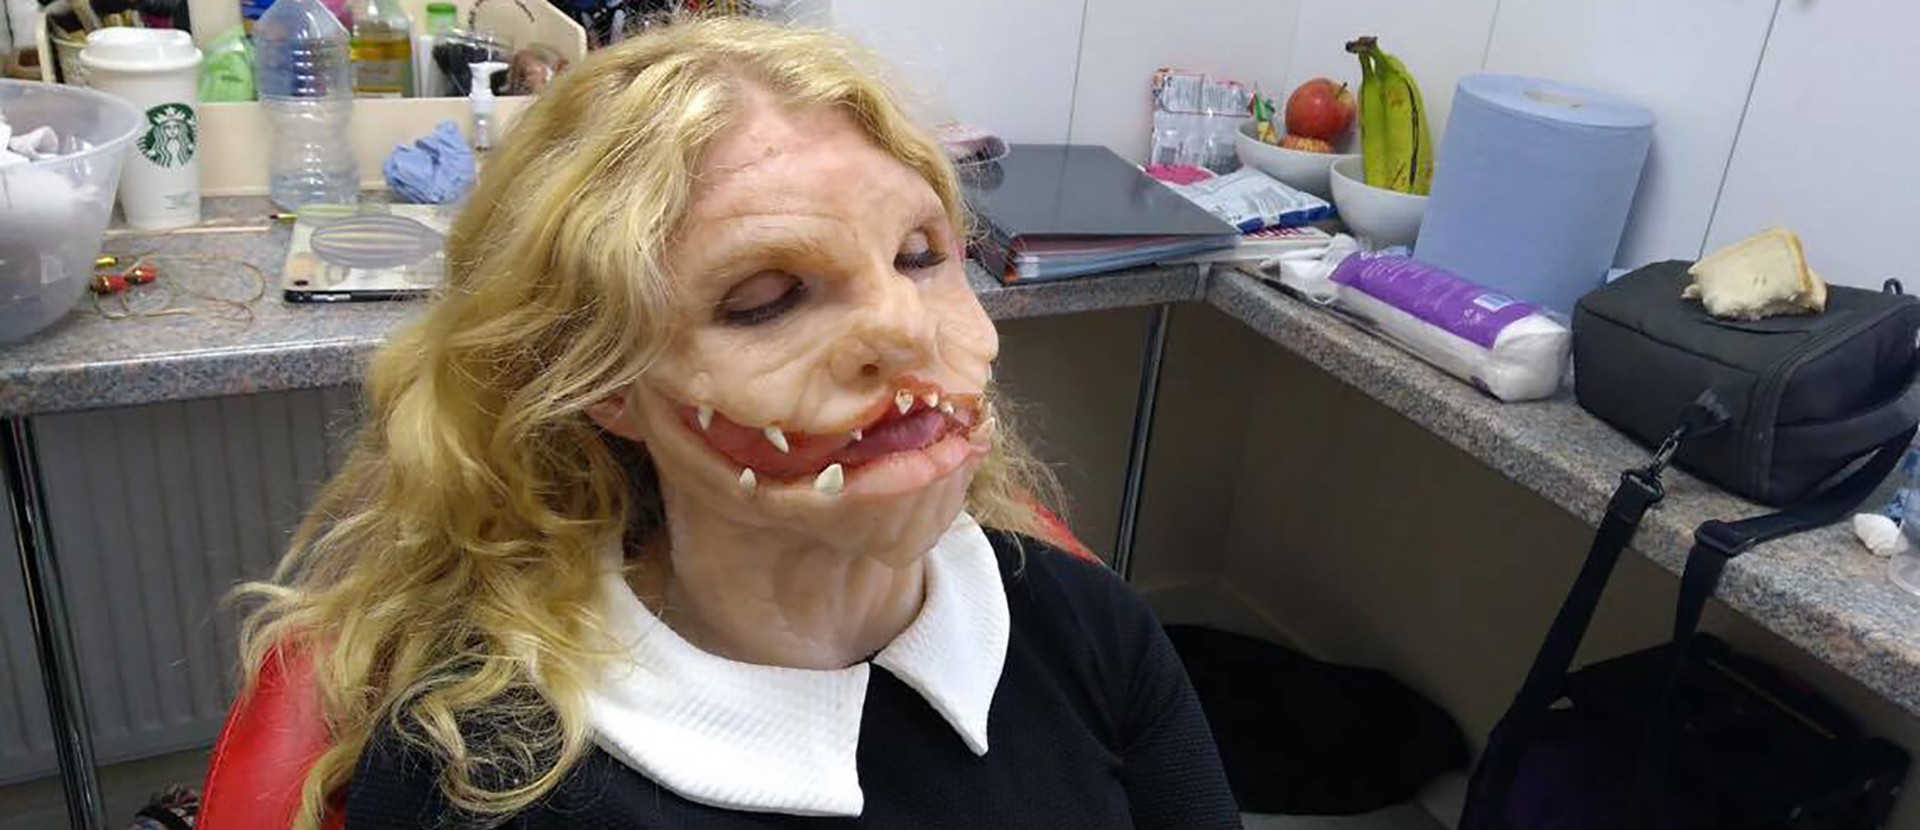 Jack Threlfall special effects makeup